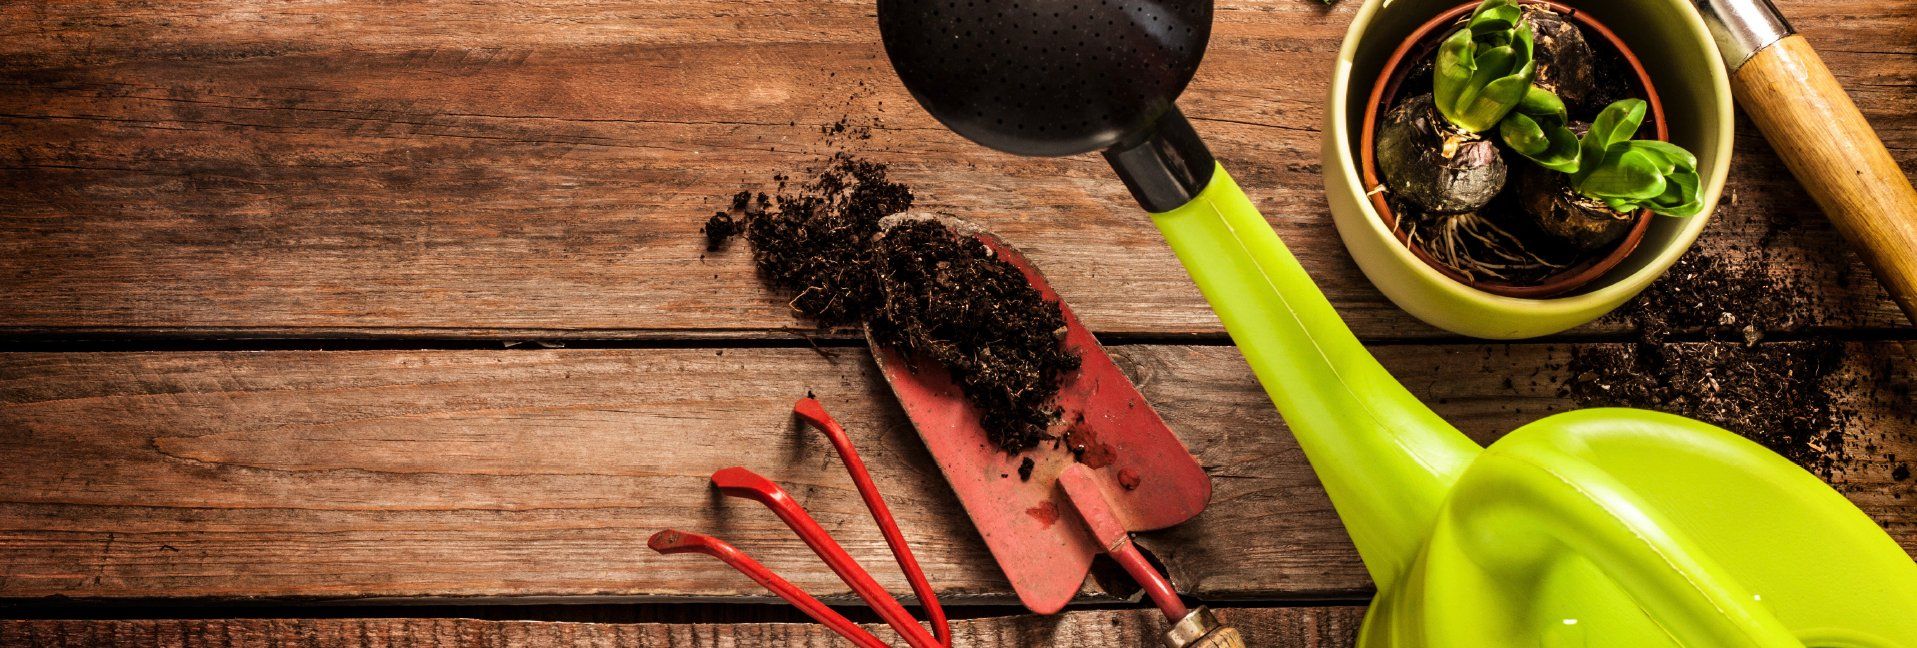 Get Those Hand Tools Ready for Gardening